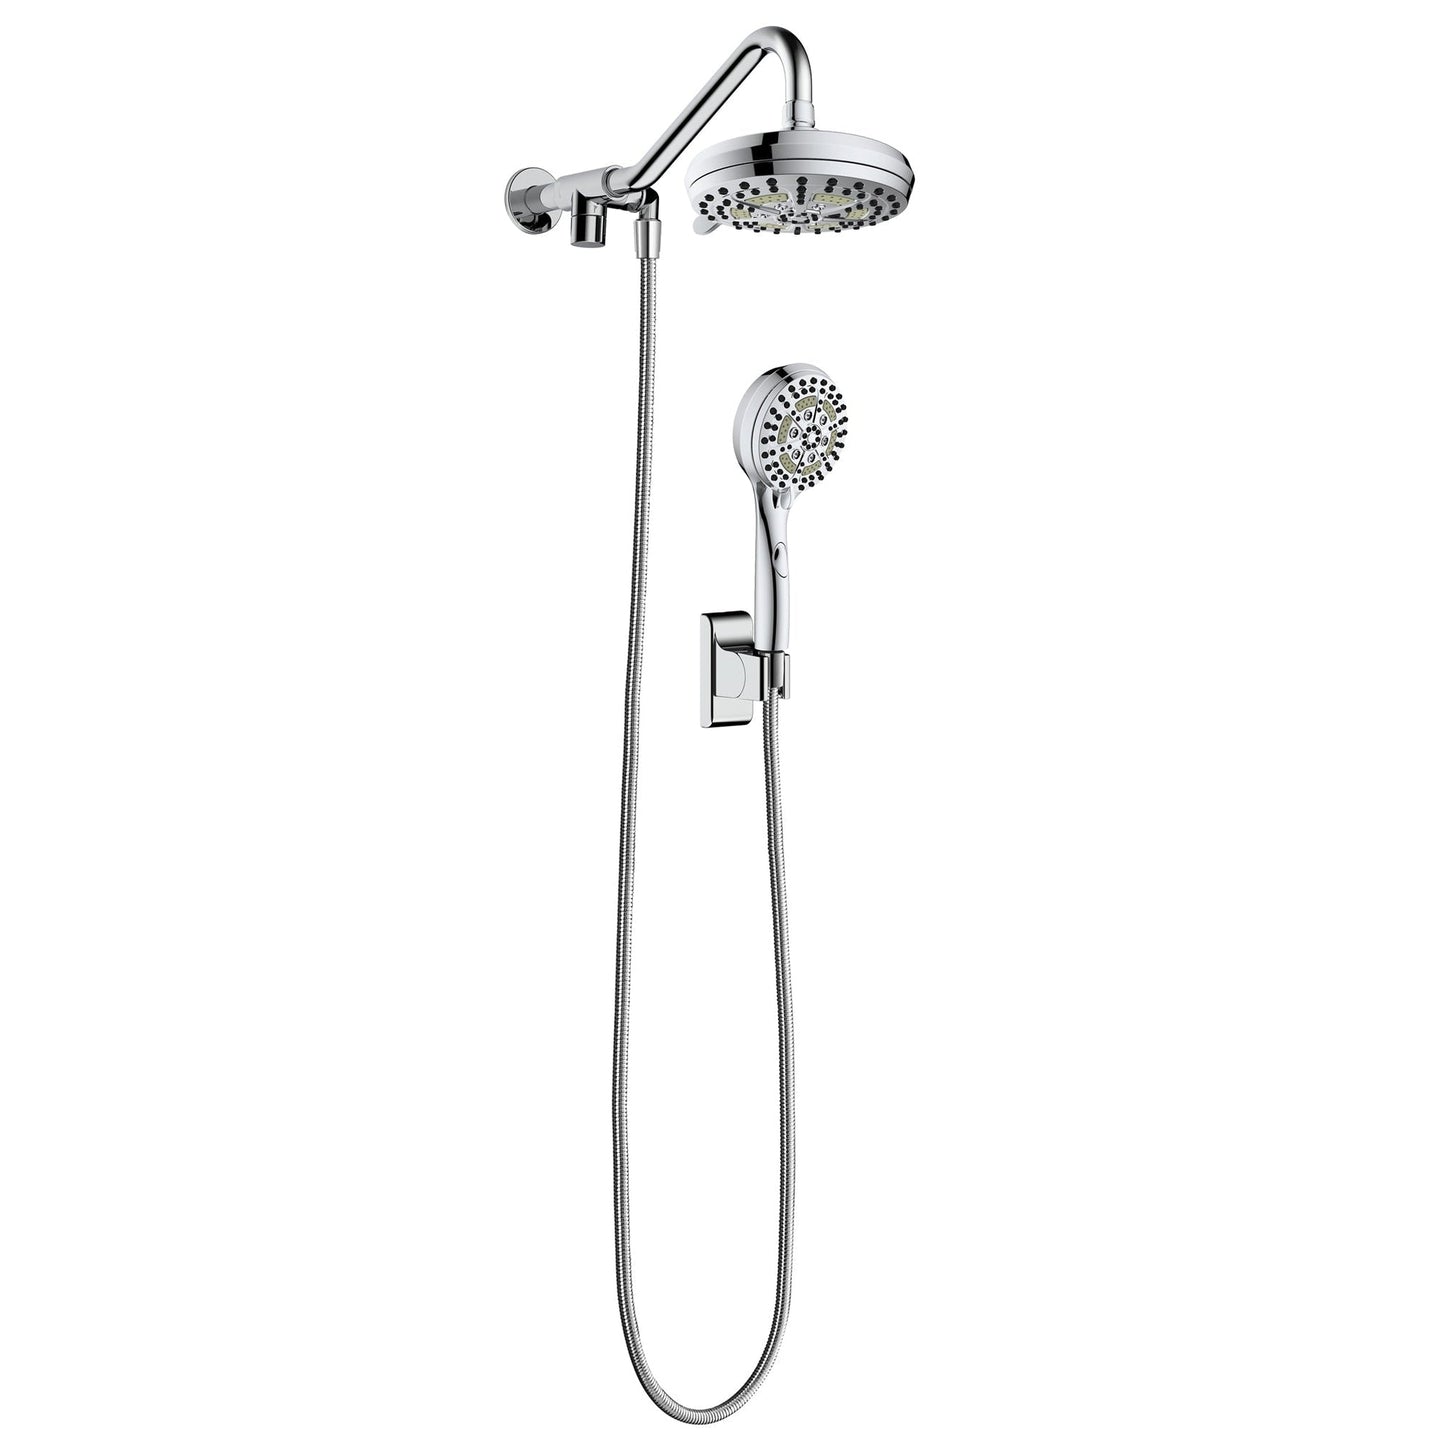 PULSE ShowerSpas Oasis Multi Function Shower System 1.8 GPM in Chrome Finish With Hand Shower